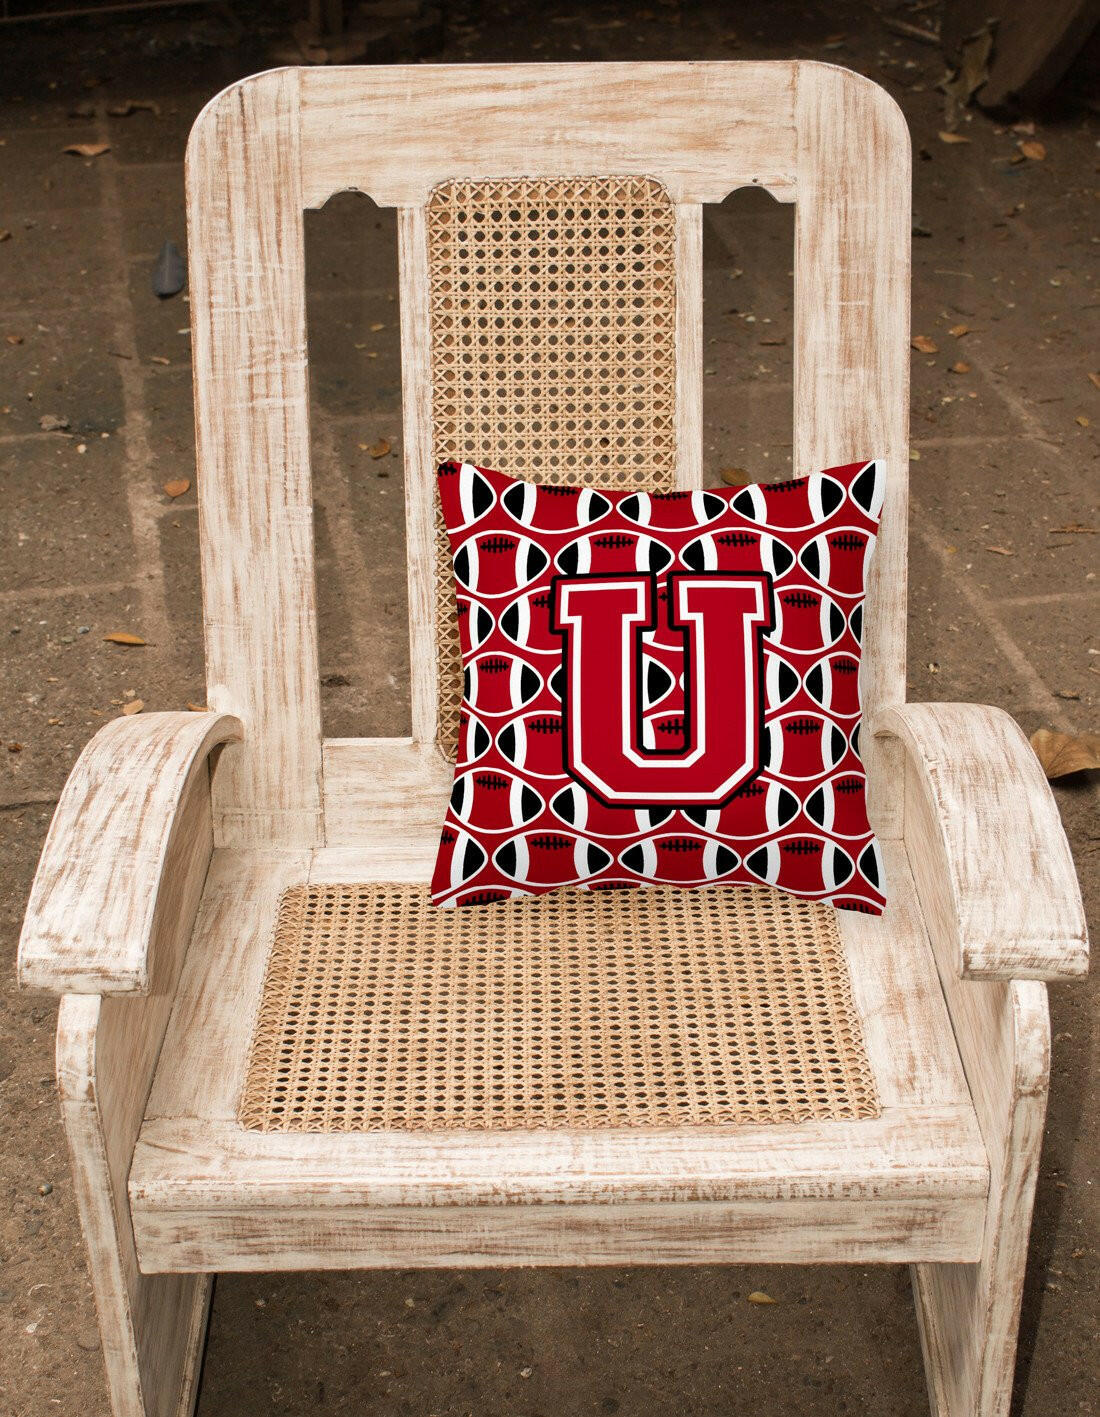 Letter U Football Red, Black and White Fabric Decorative Pillow CJ1073-UPW1414 by Caroline's Treasures